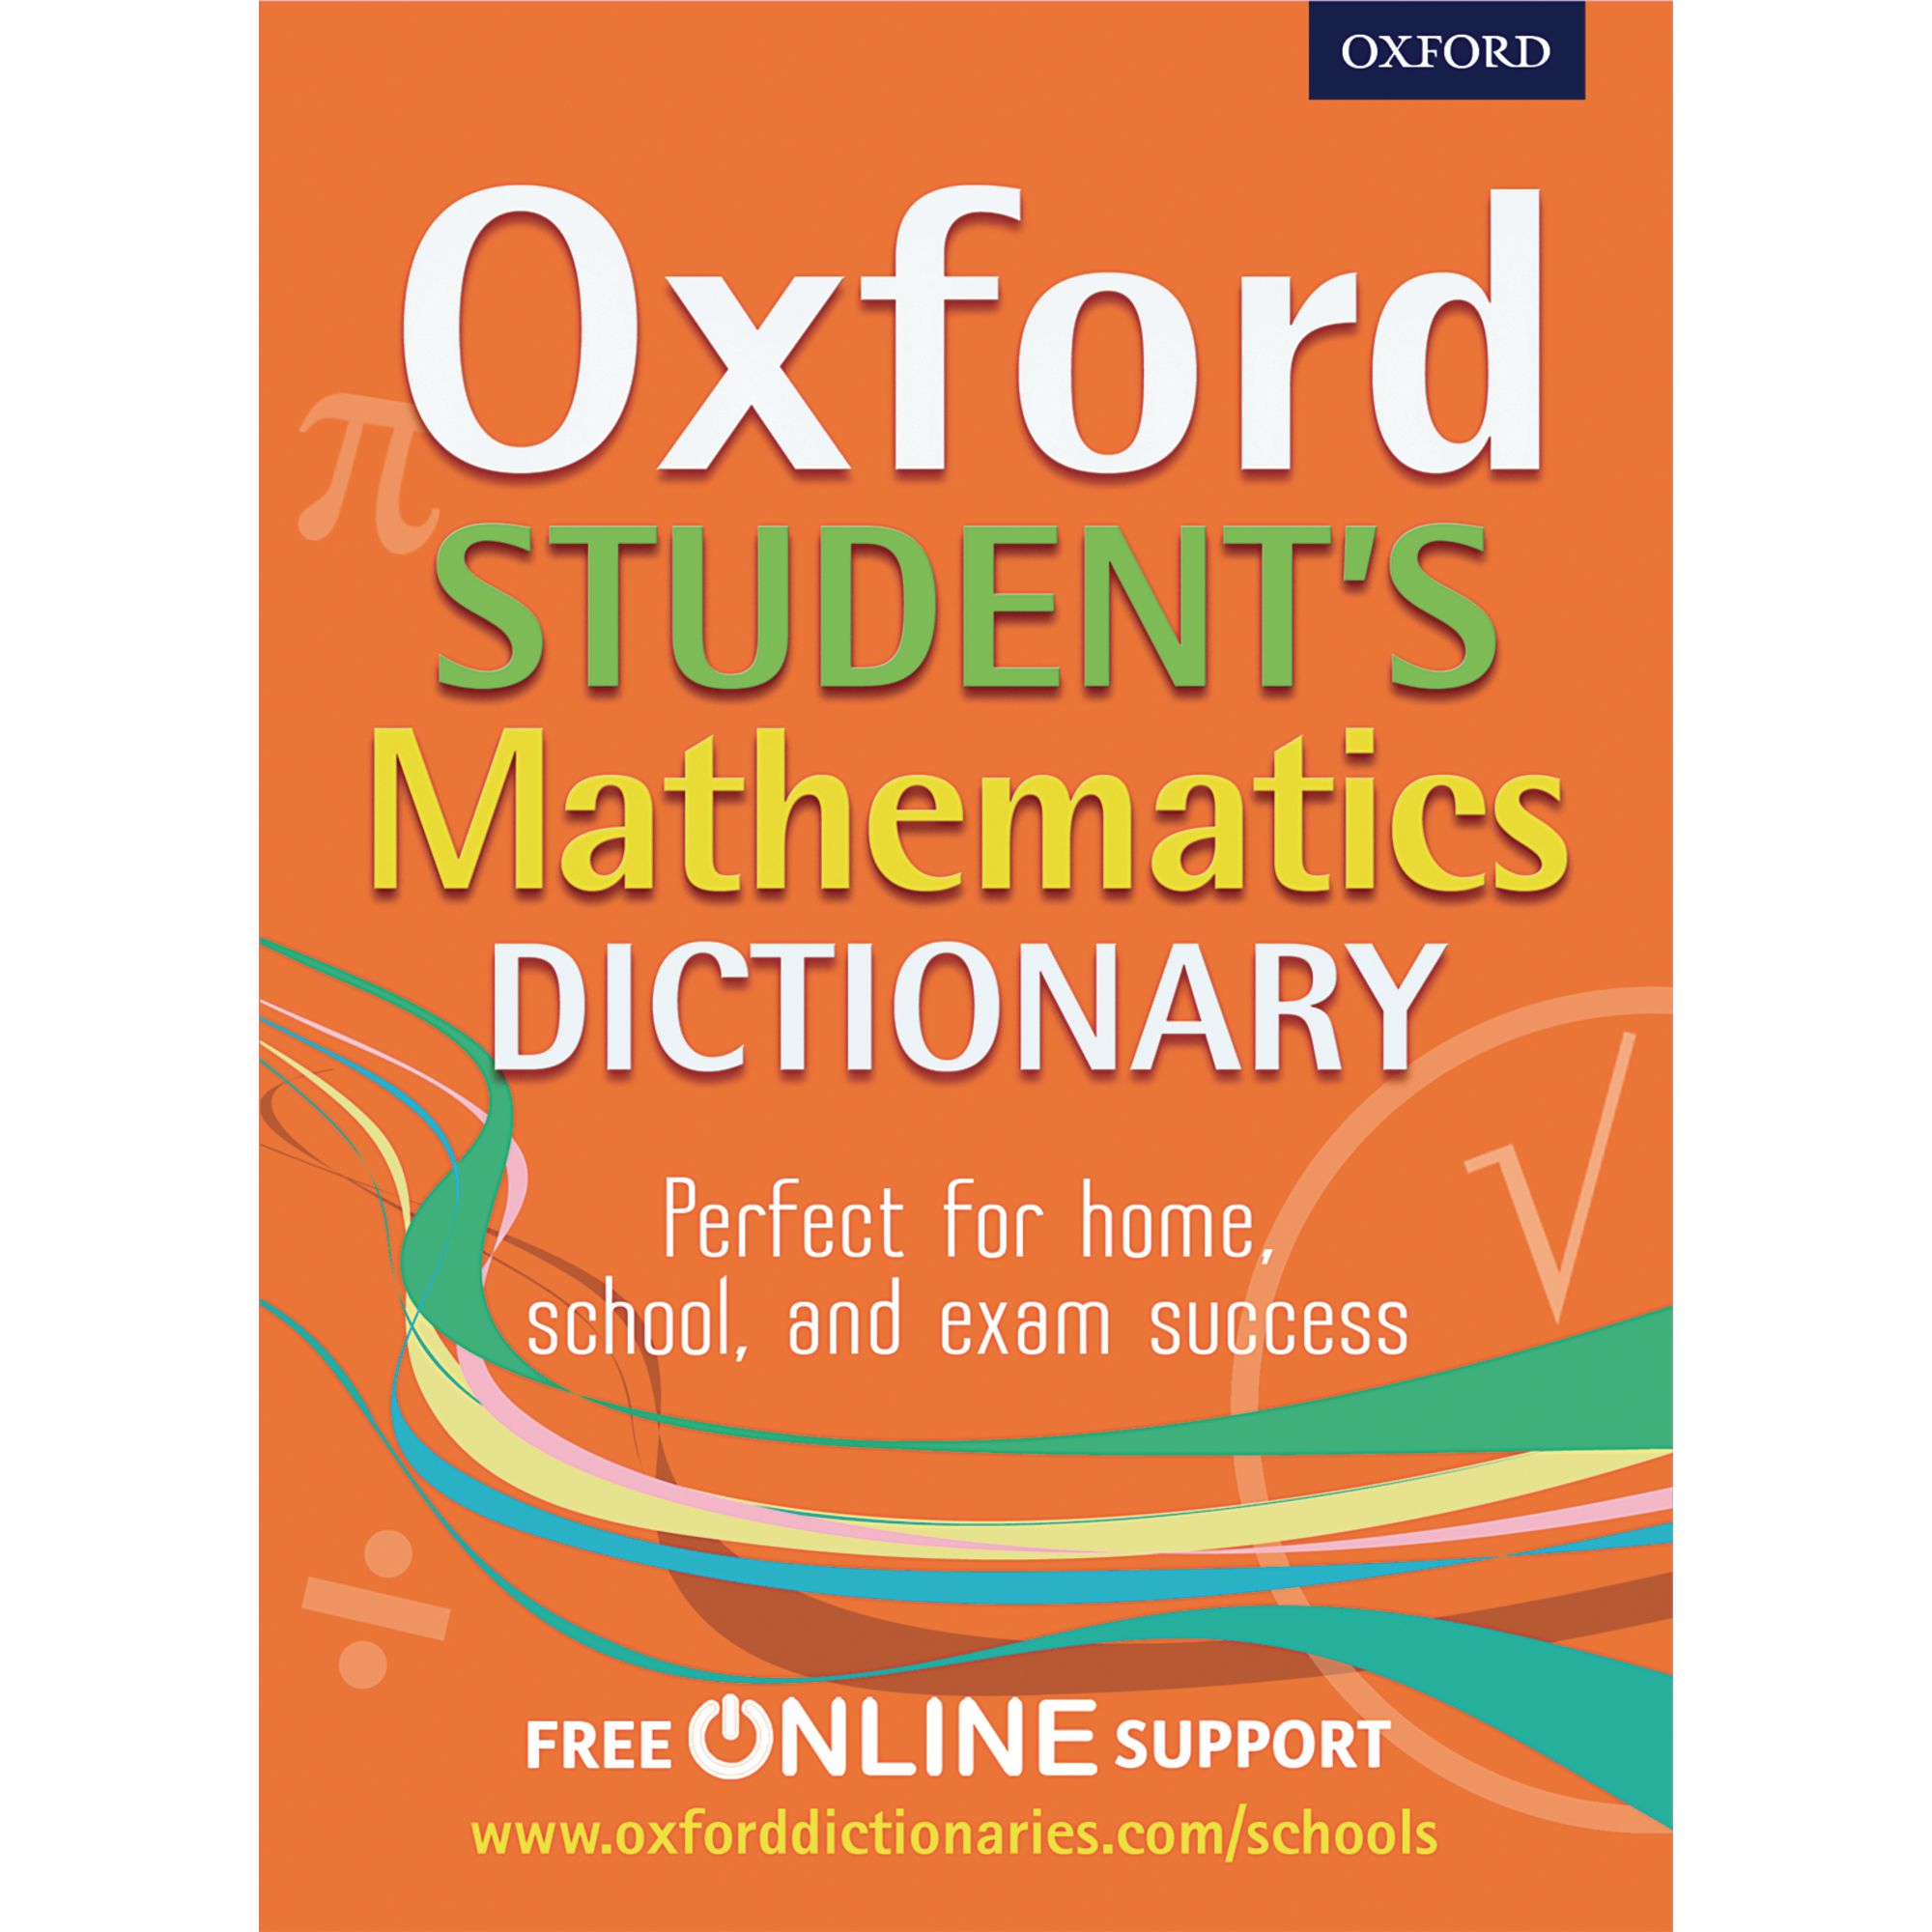 he1197917-oxford-student-maths-dictionary-hope-education